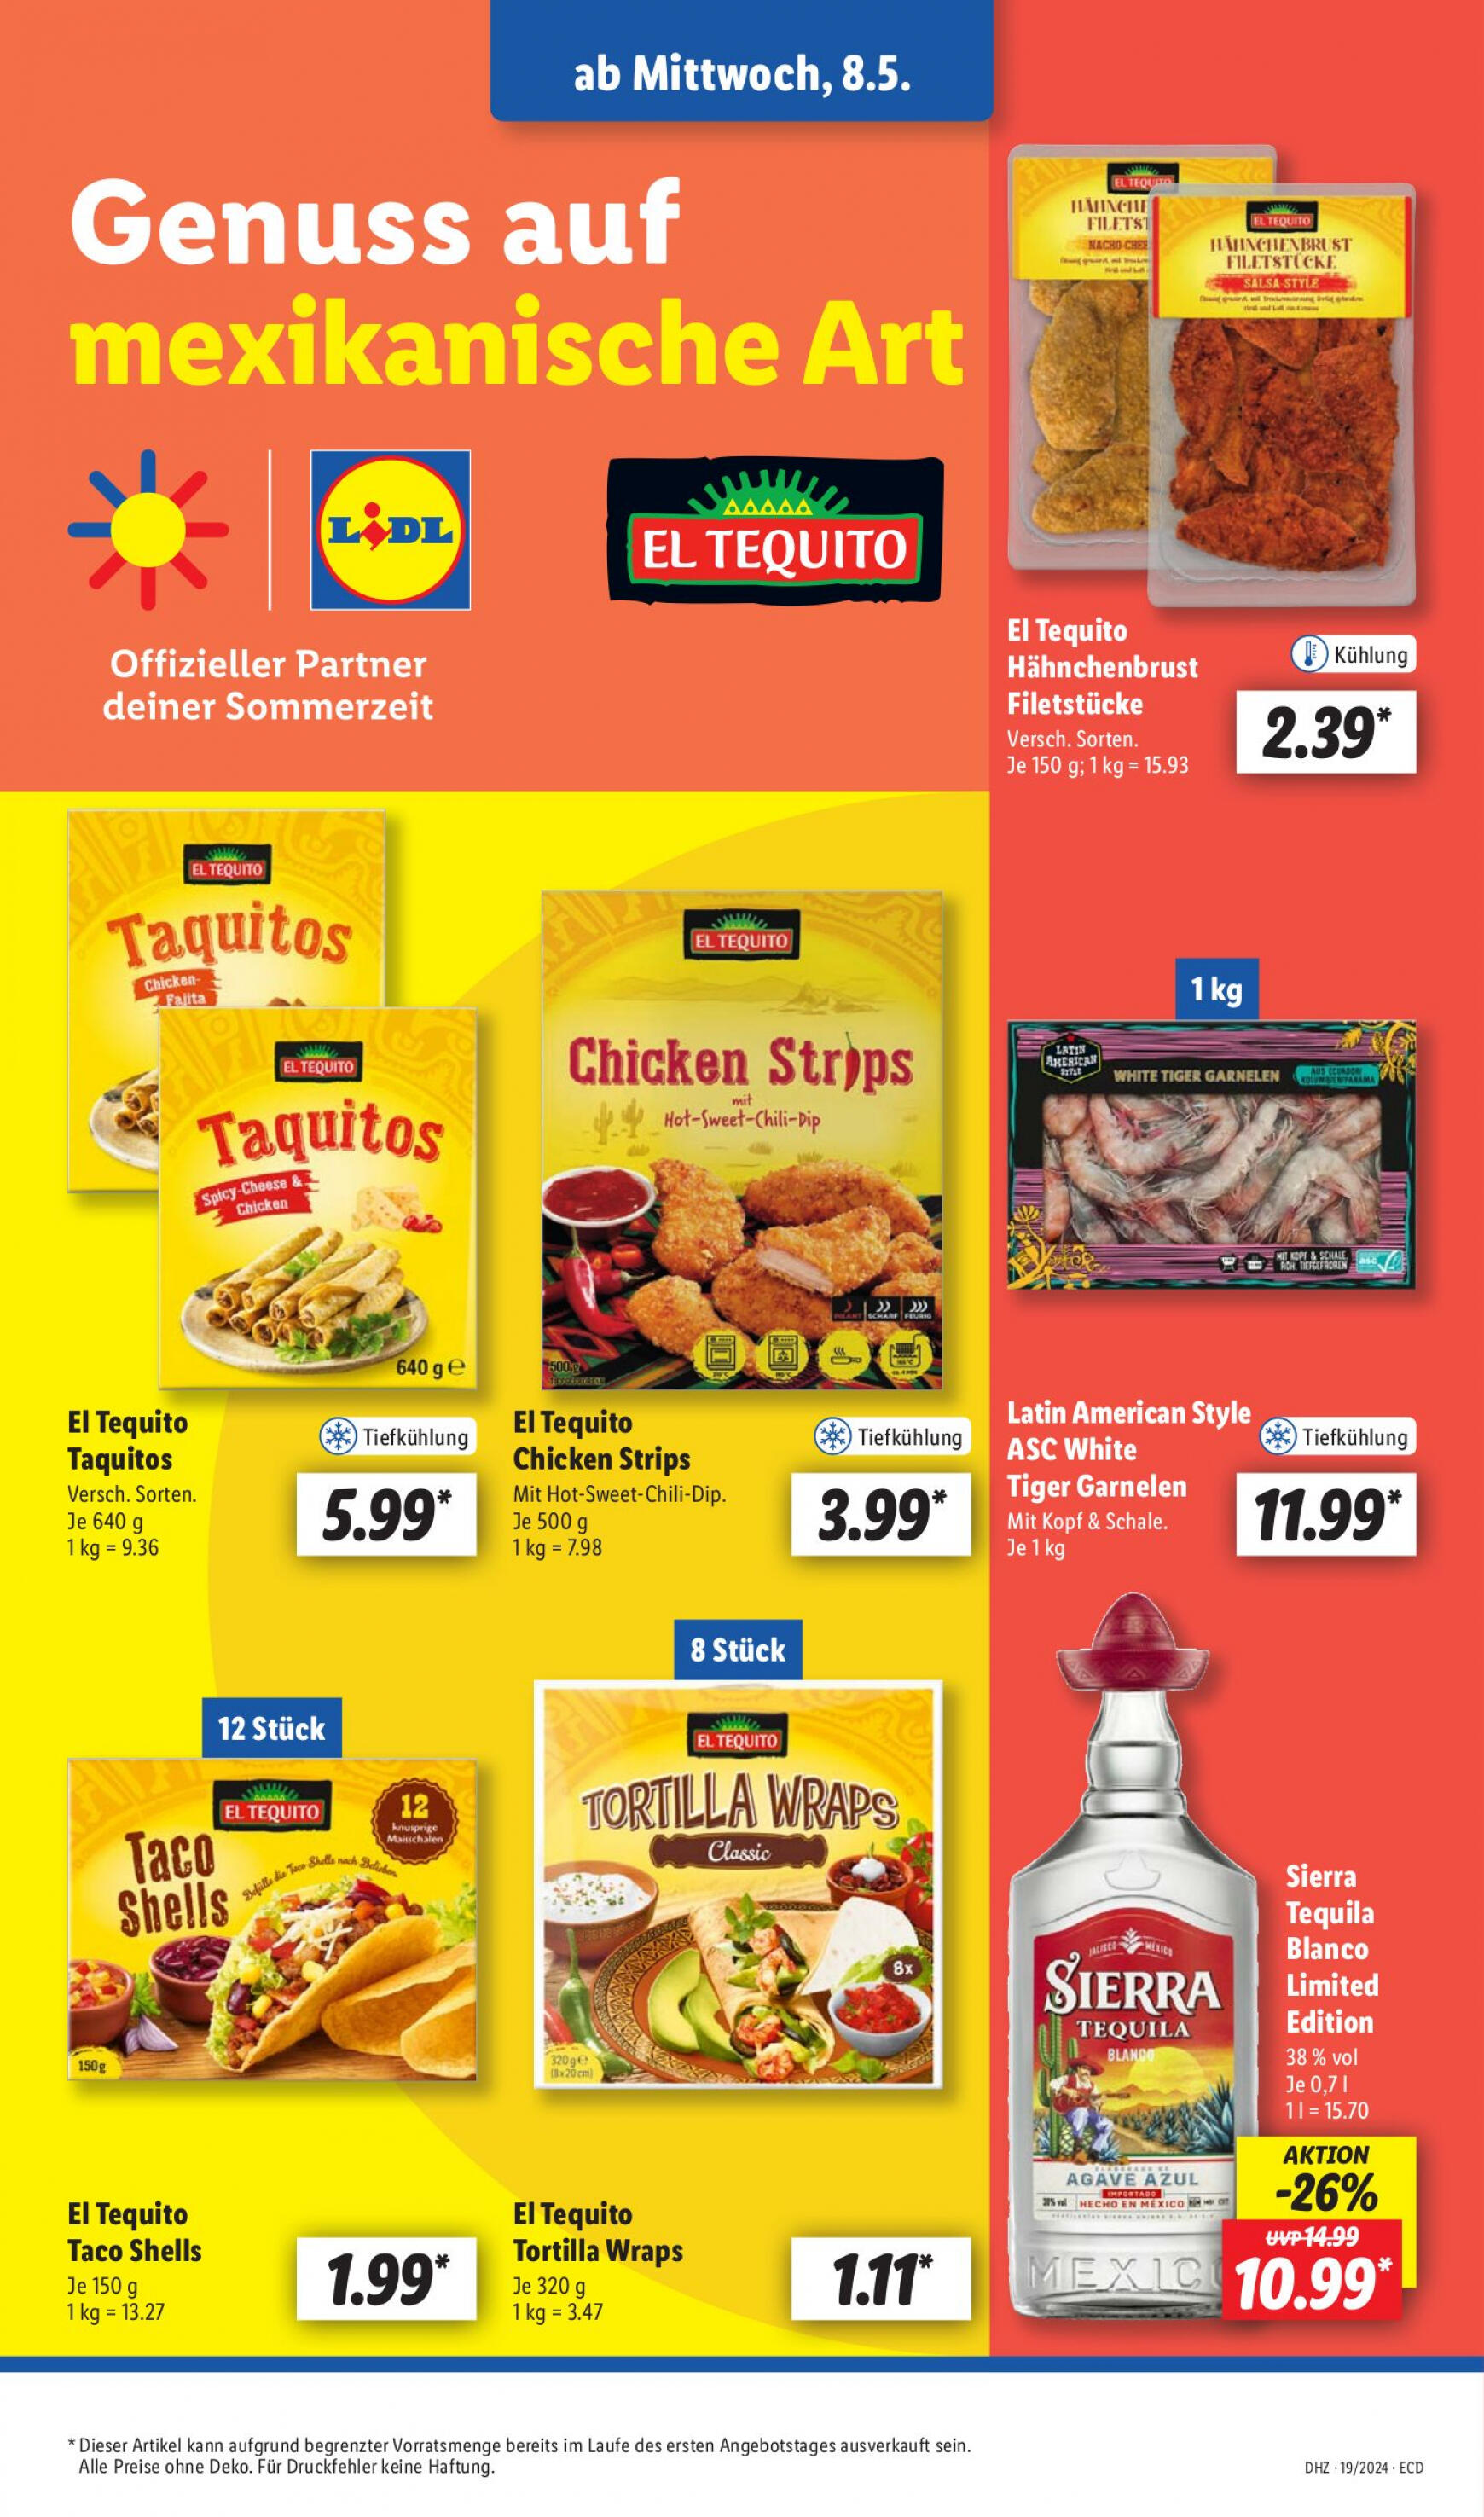 lidl - Flyer Lidl aktuell 06.05. - 11.05. - page: 39